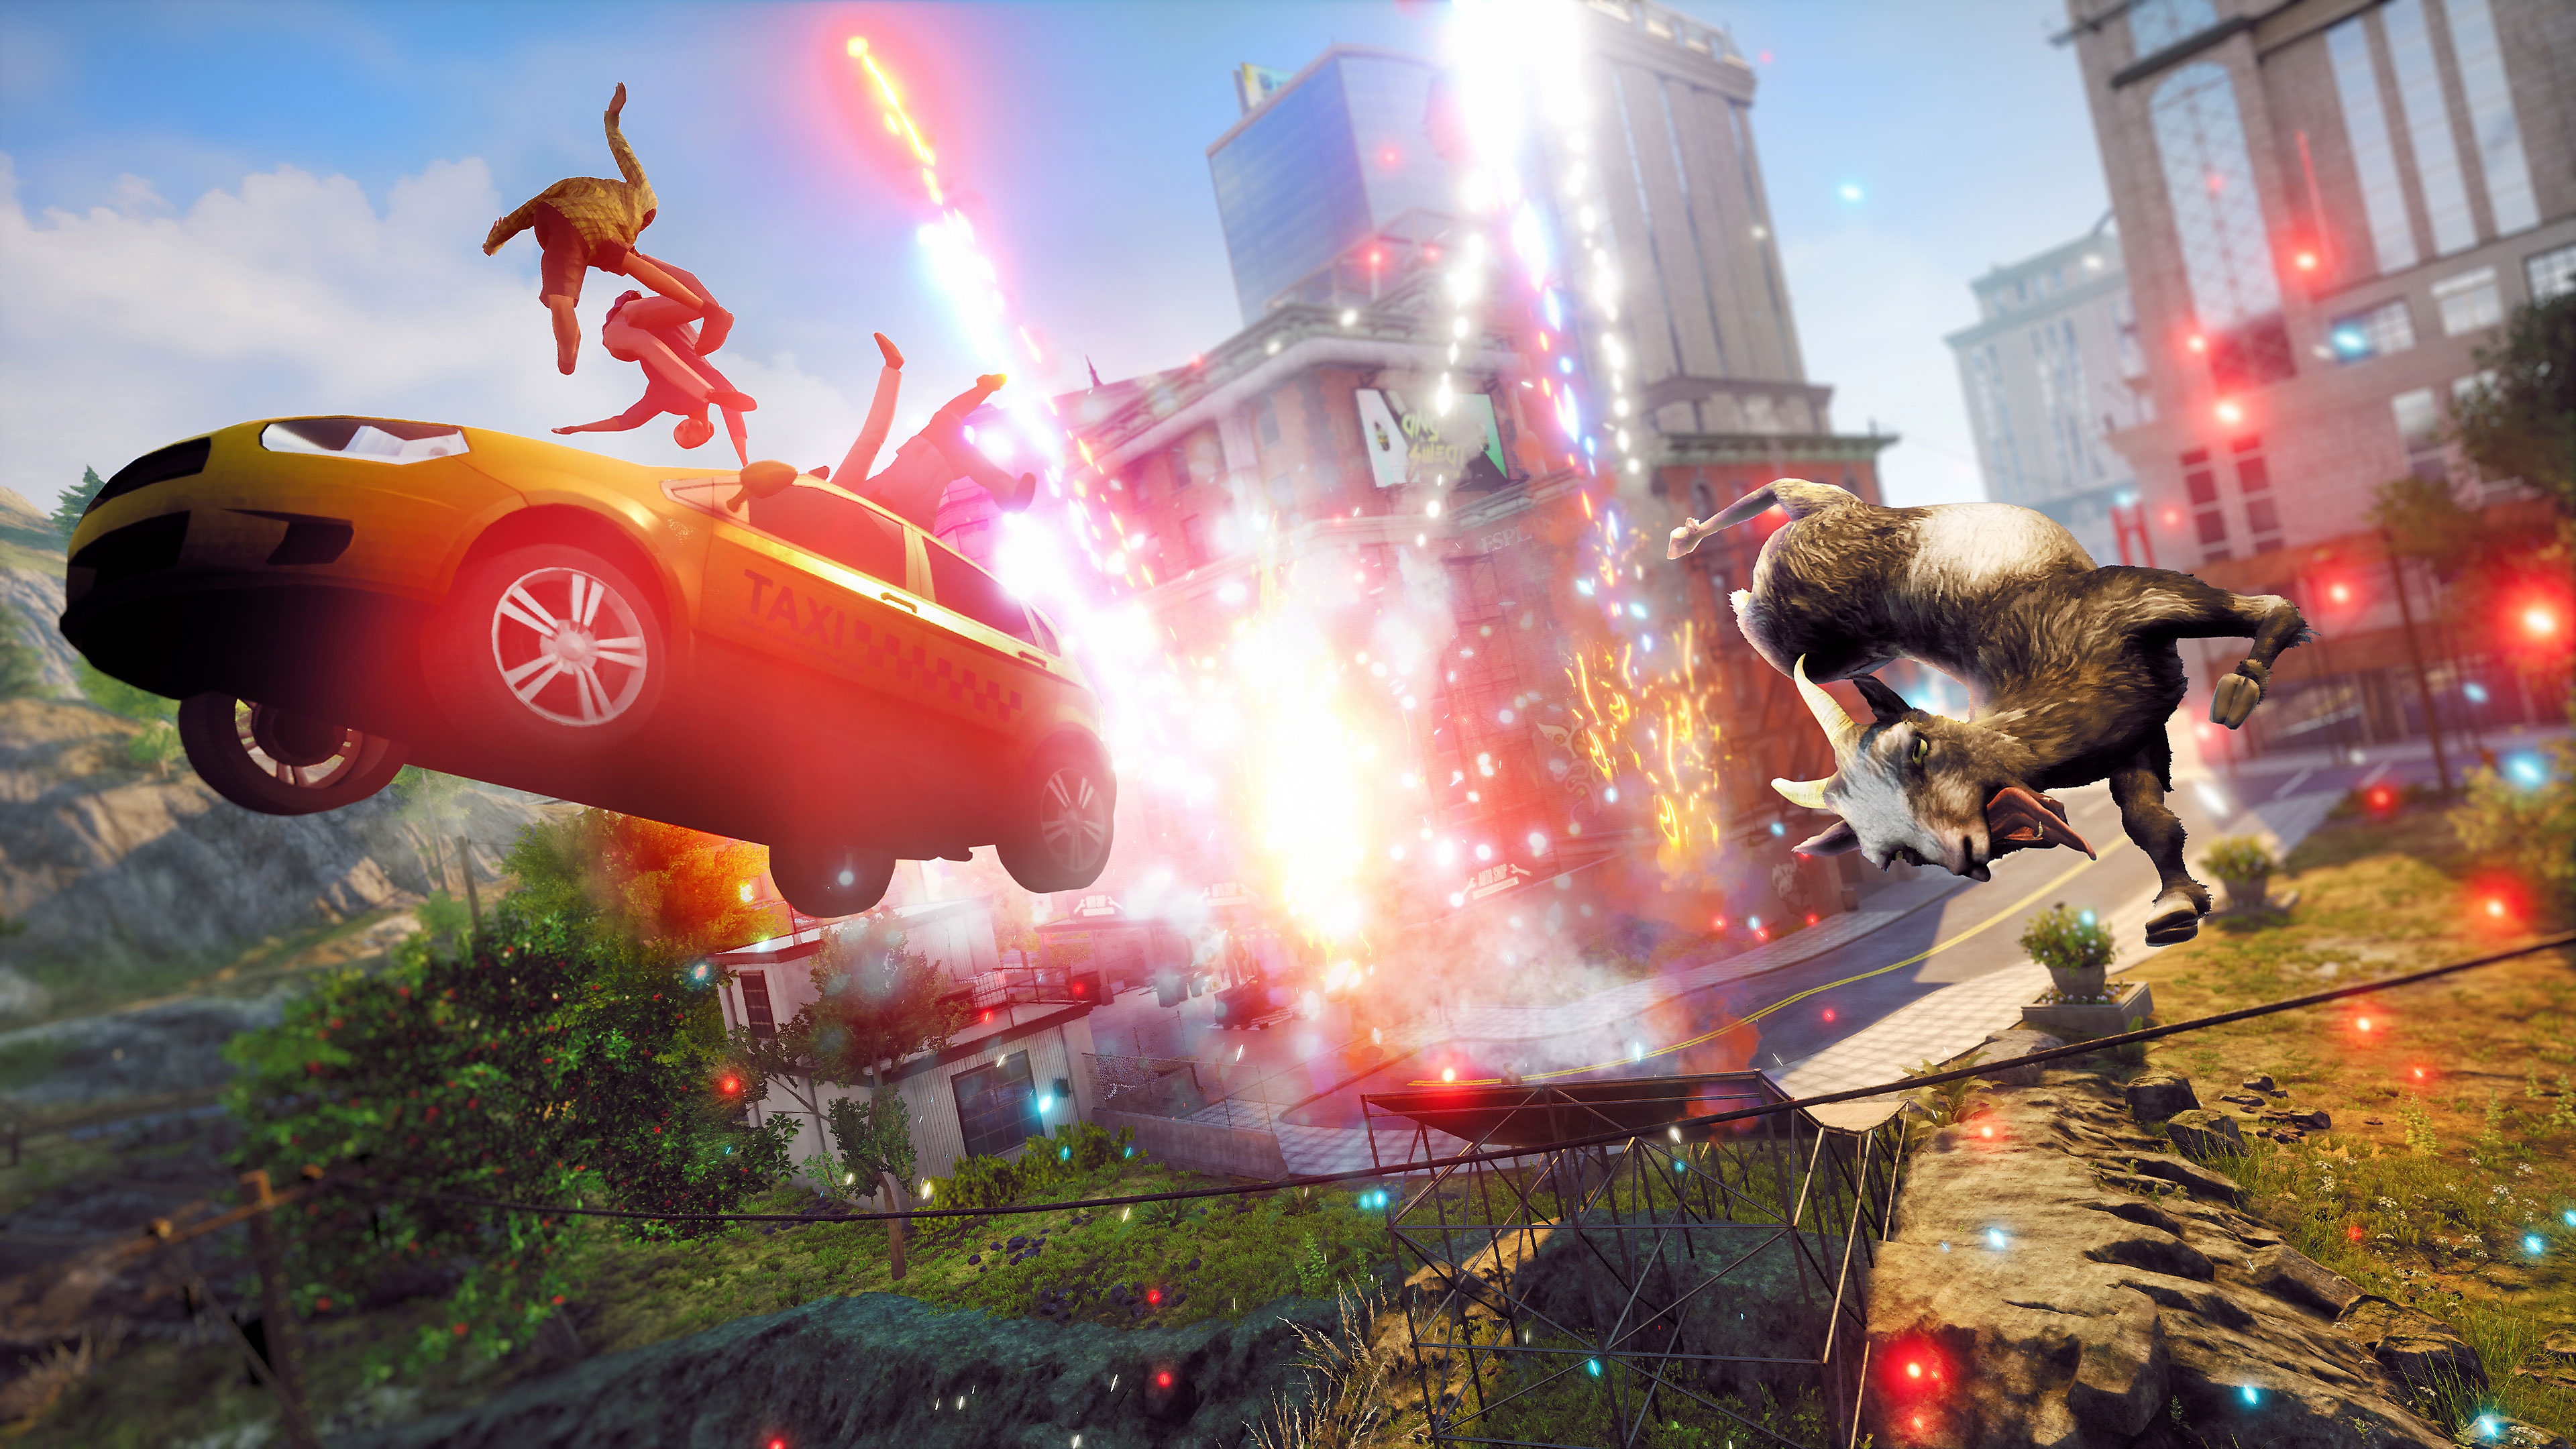 Goat Simulator 3 screenshot showing a car and a goat flying through the air with an explosion in the background